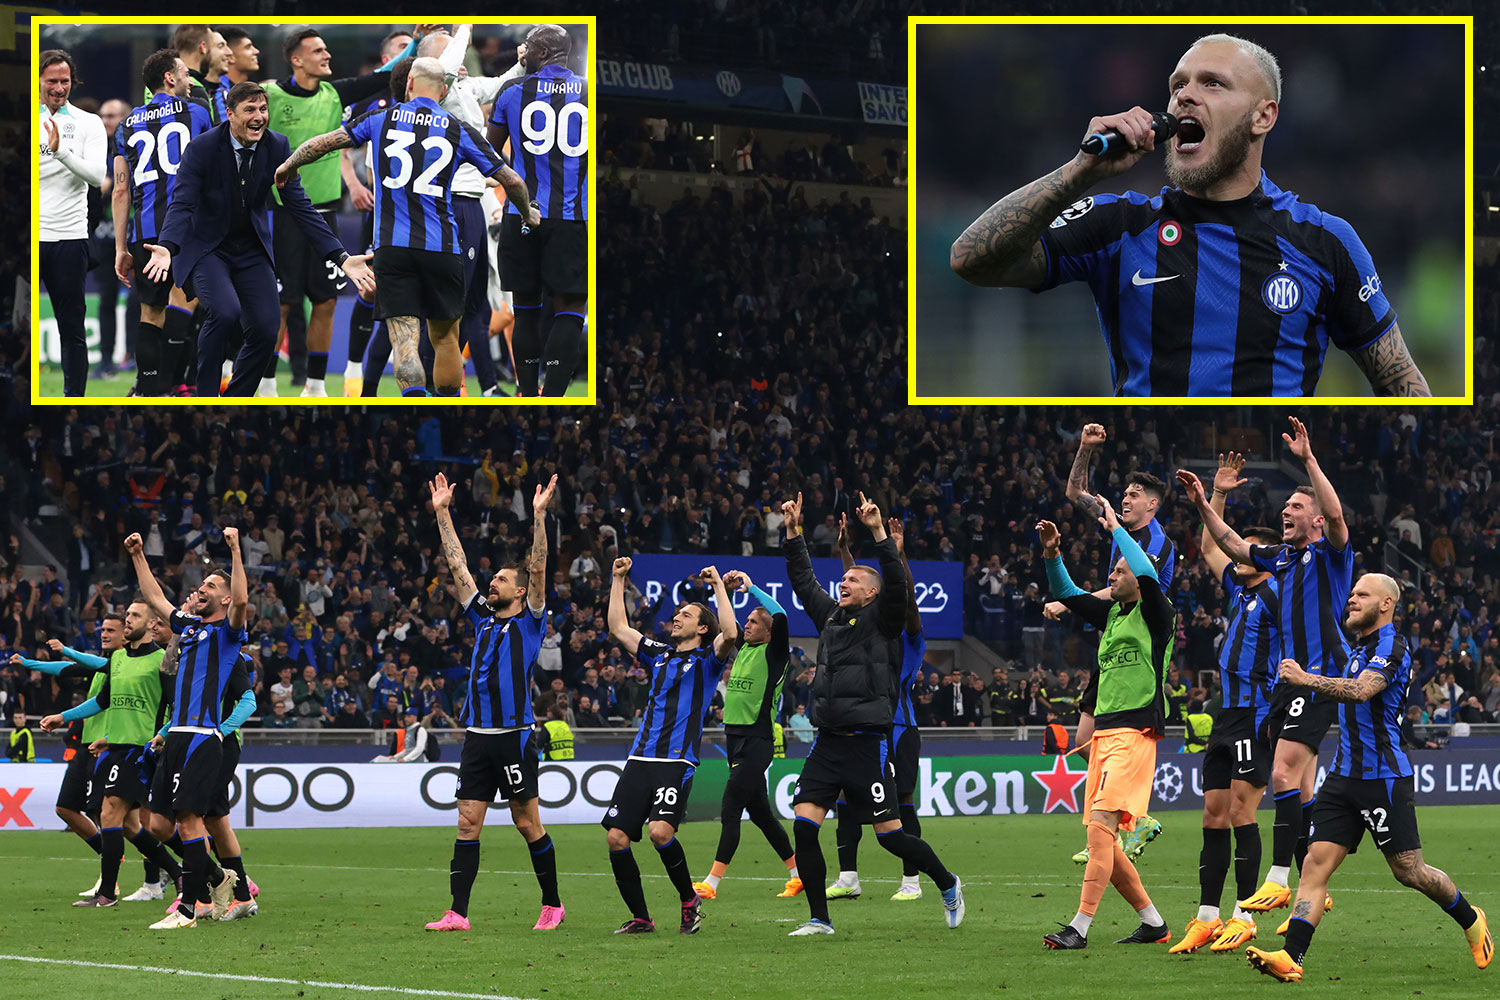 Inter Milan celebrate reaching Champions League final with fans as Man City and Real Madrid warned they won't be pushovers